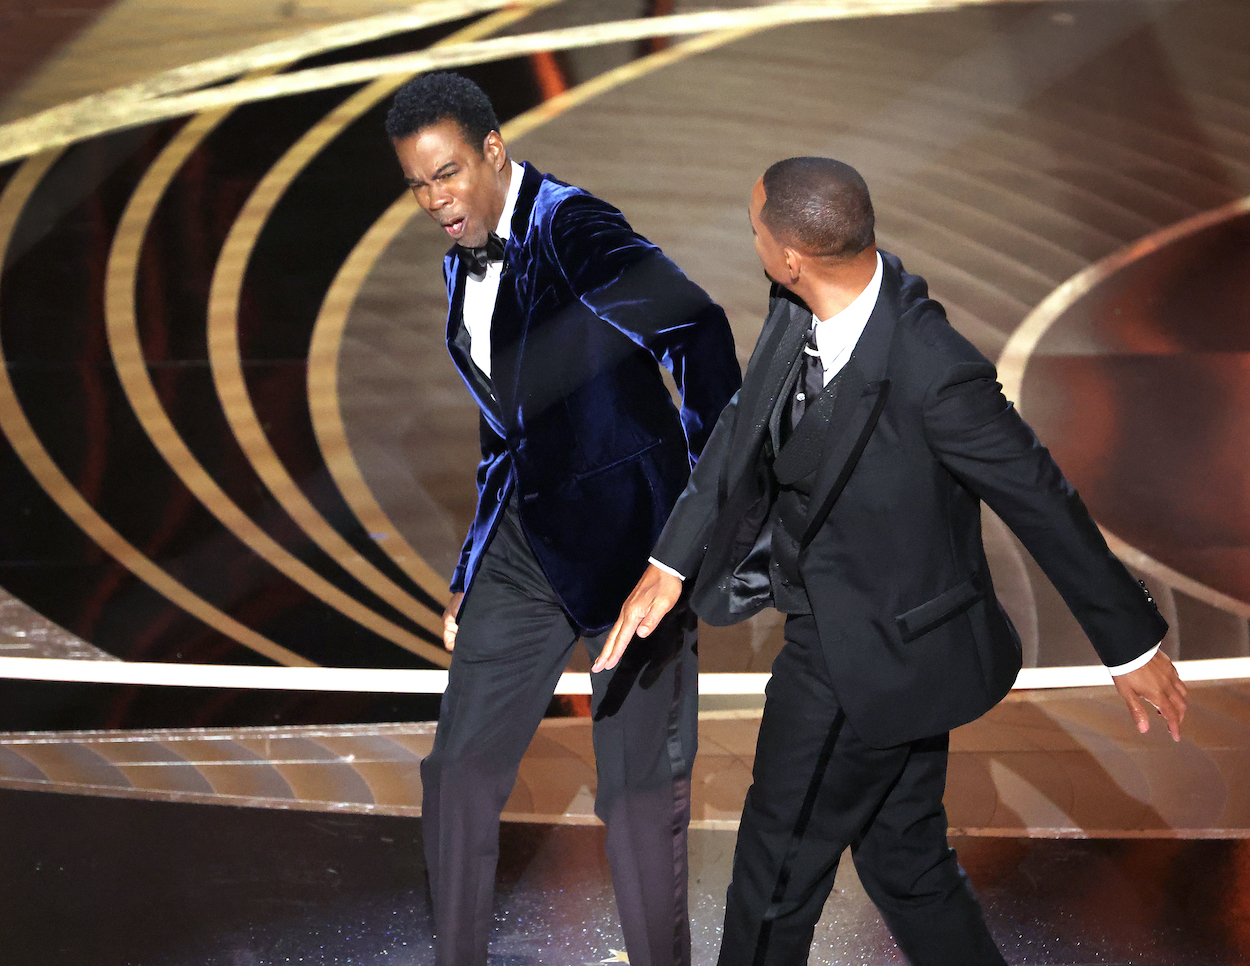 Will Smith (right) and Chris Rock moments after Smith slapped Rock at the 2022 Academy Awards. Smith finally apologized to Rock for the Oscars slap with a July 2022 video on his YouTube channel.